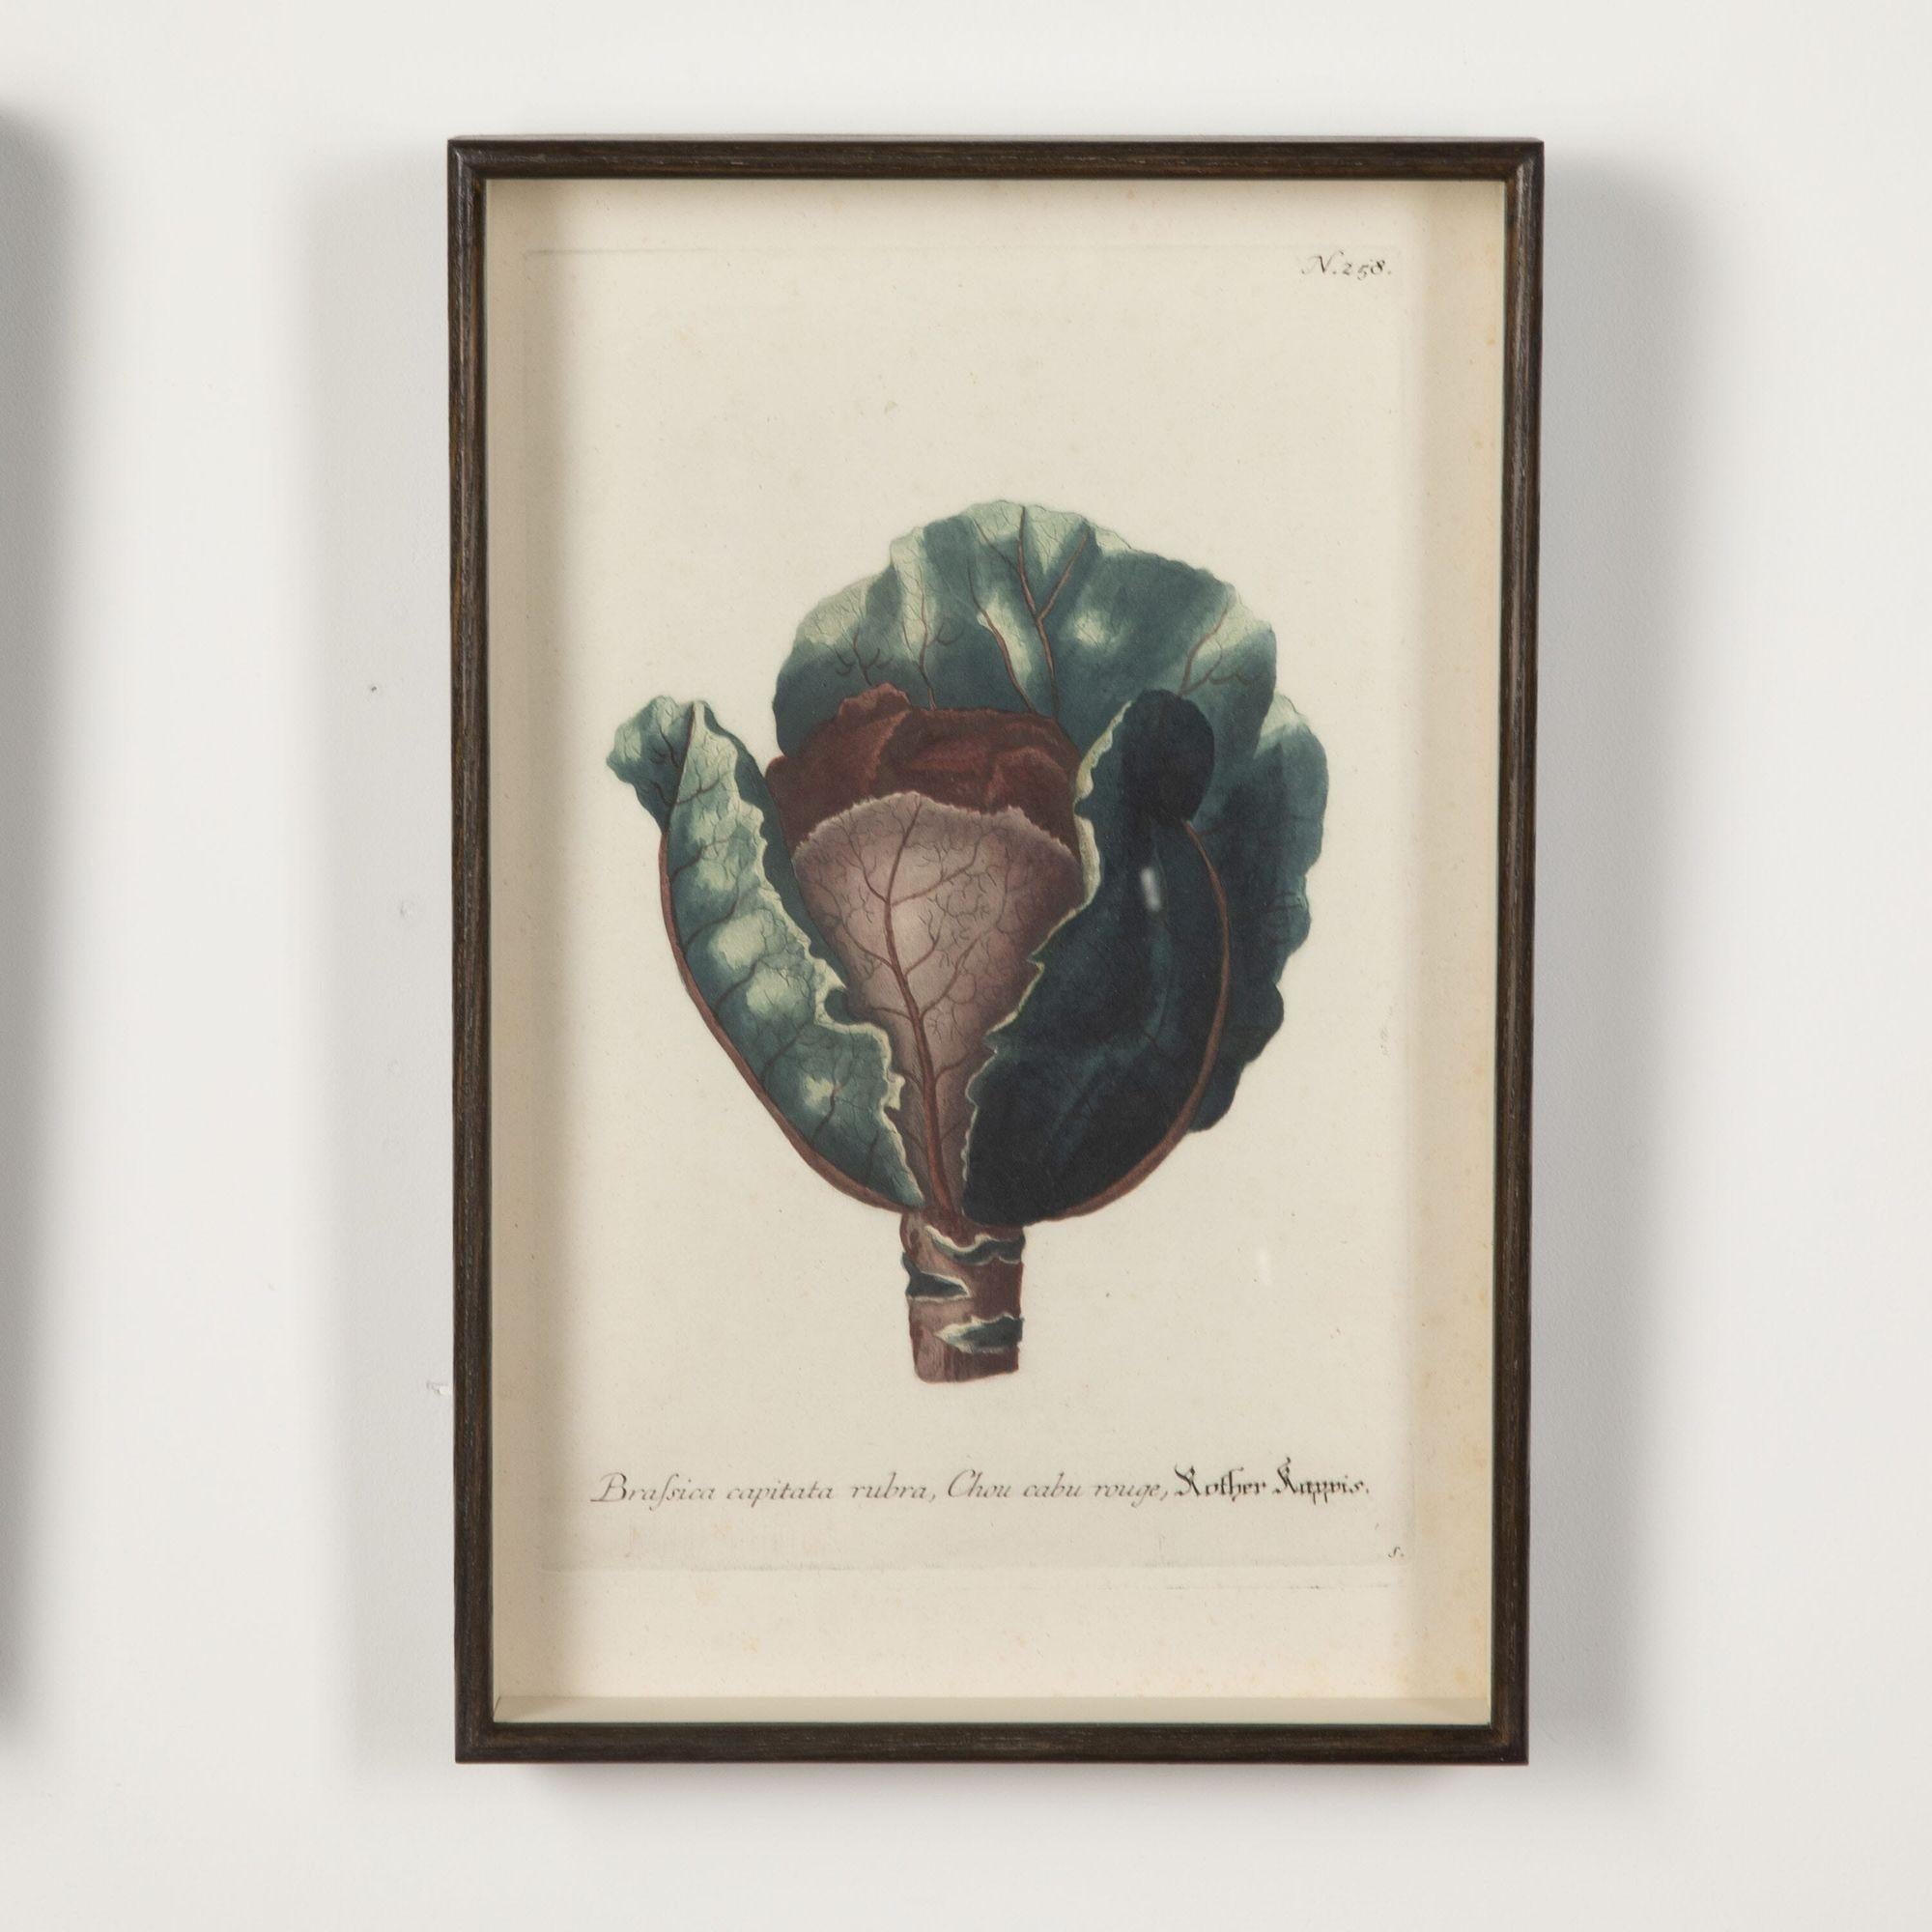 Collection of nine 18th century botanical engravings of vegetables including aspagagus, capsicum, pea & red cabbage. 
With original hand colouring from: Phytanthoza Iconographia by Johann Wilhelm Weinmann Regensburg.
circa 1740 and presented in